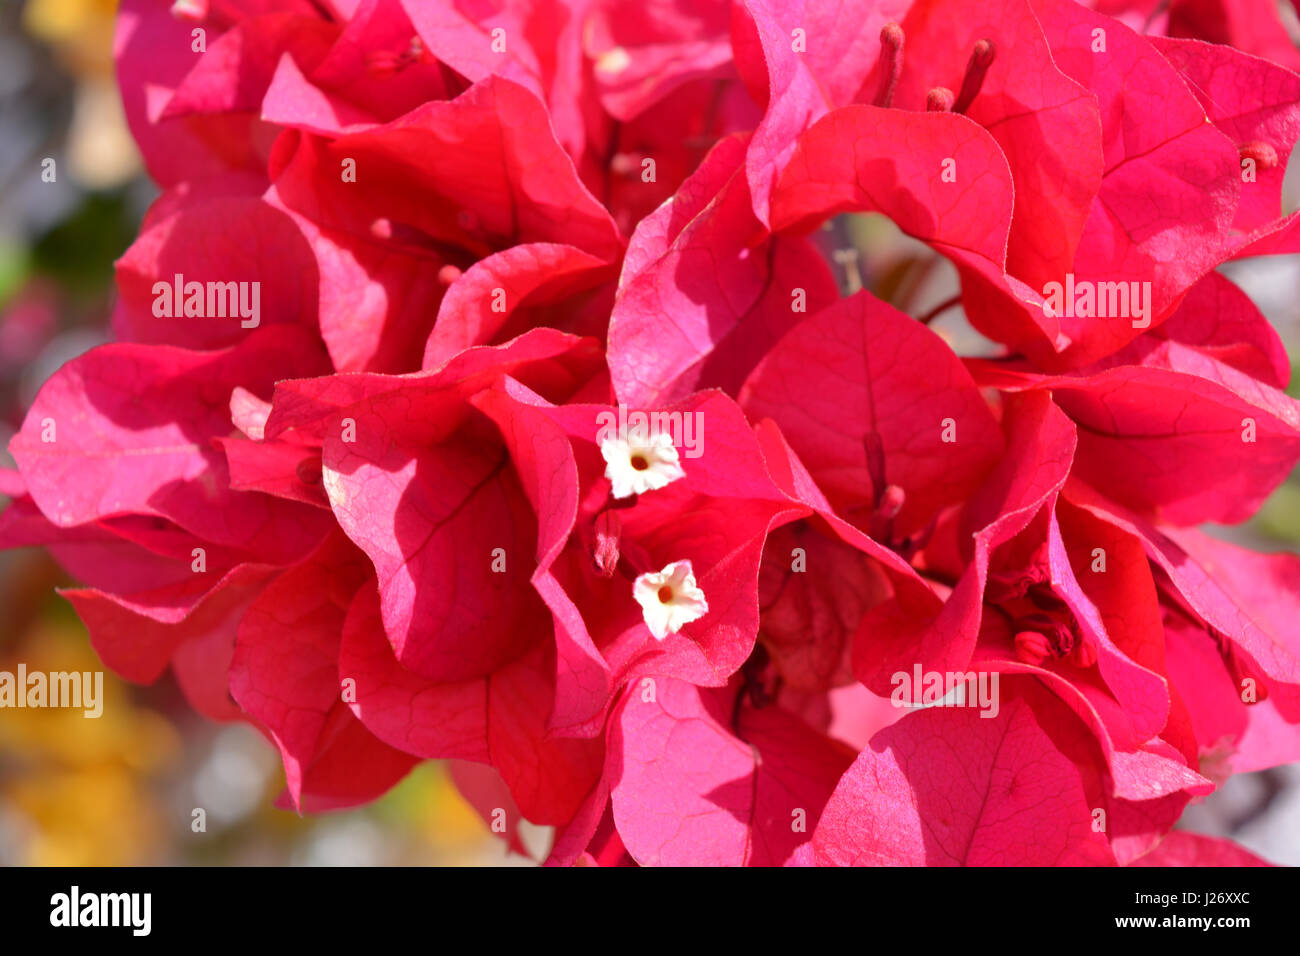 Bougainvillea, red bracts and tiny white flowers Stock Photo